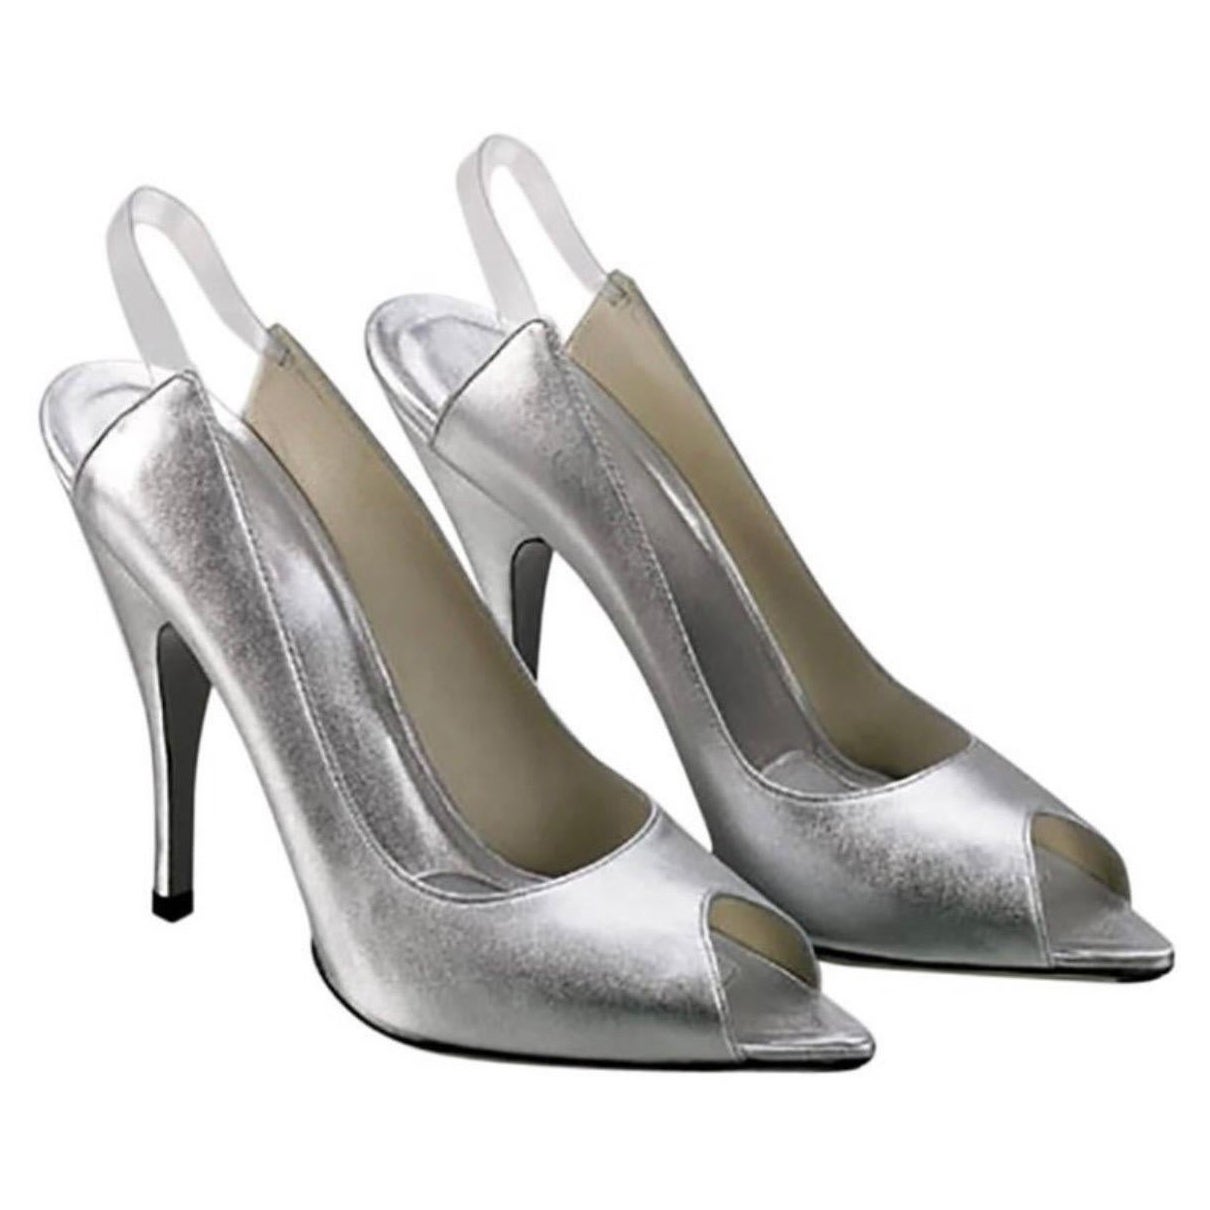 Iconic 2003 Tom Ford for Gucci from Ad Campaign Silver Shoes Sandals 38 C For Sale